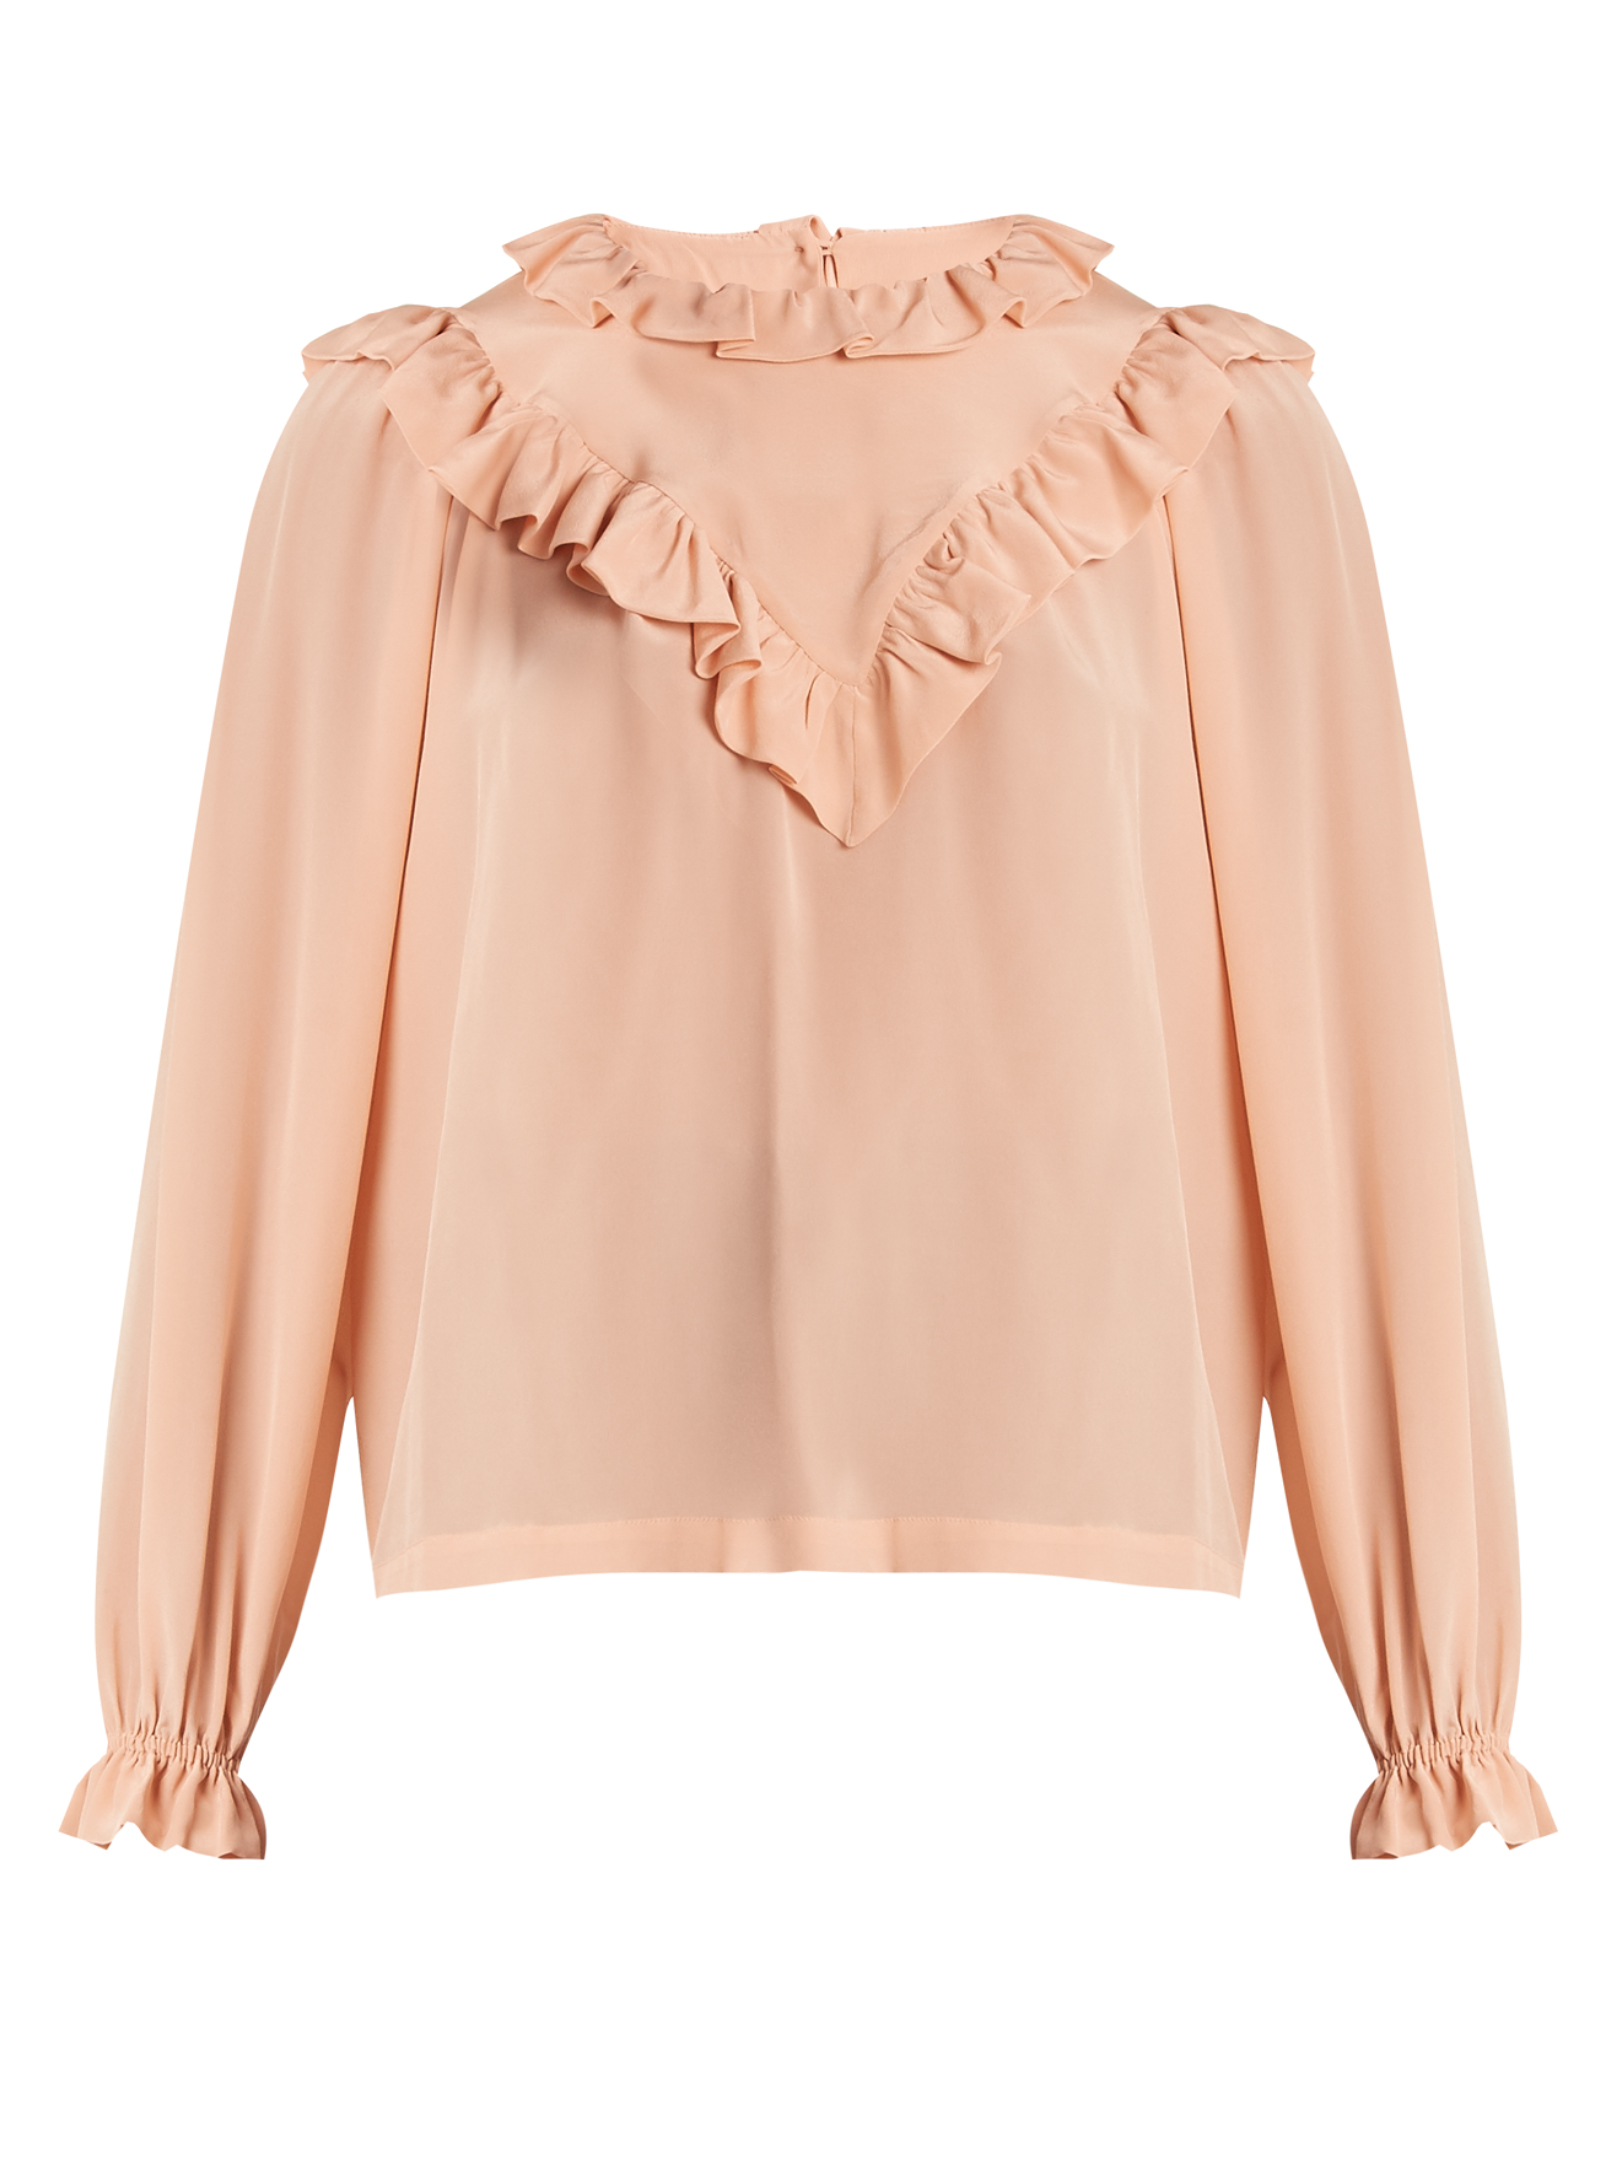 Preen By Thornton Bregazzi - Dale Ruffle-Trimmed Silk Blouse | ABOUT ICONS